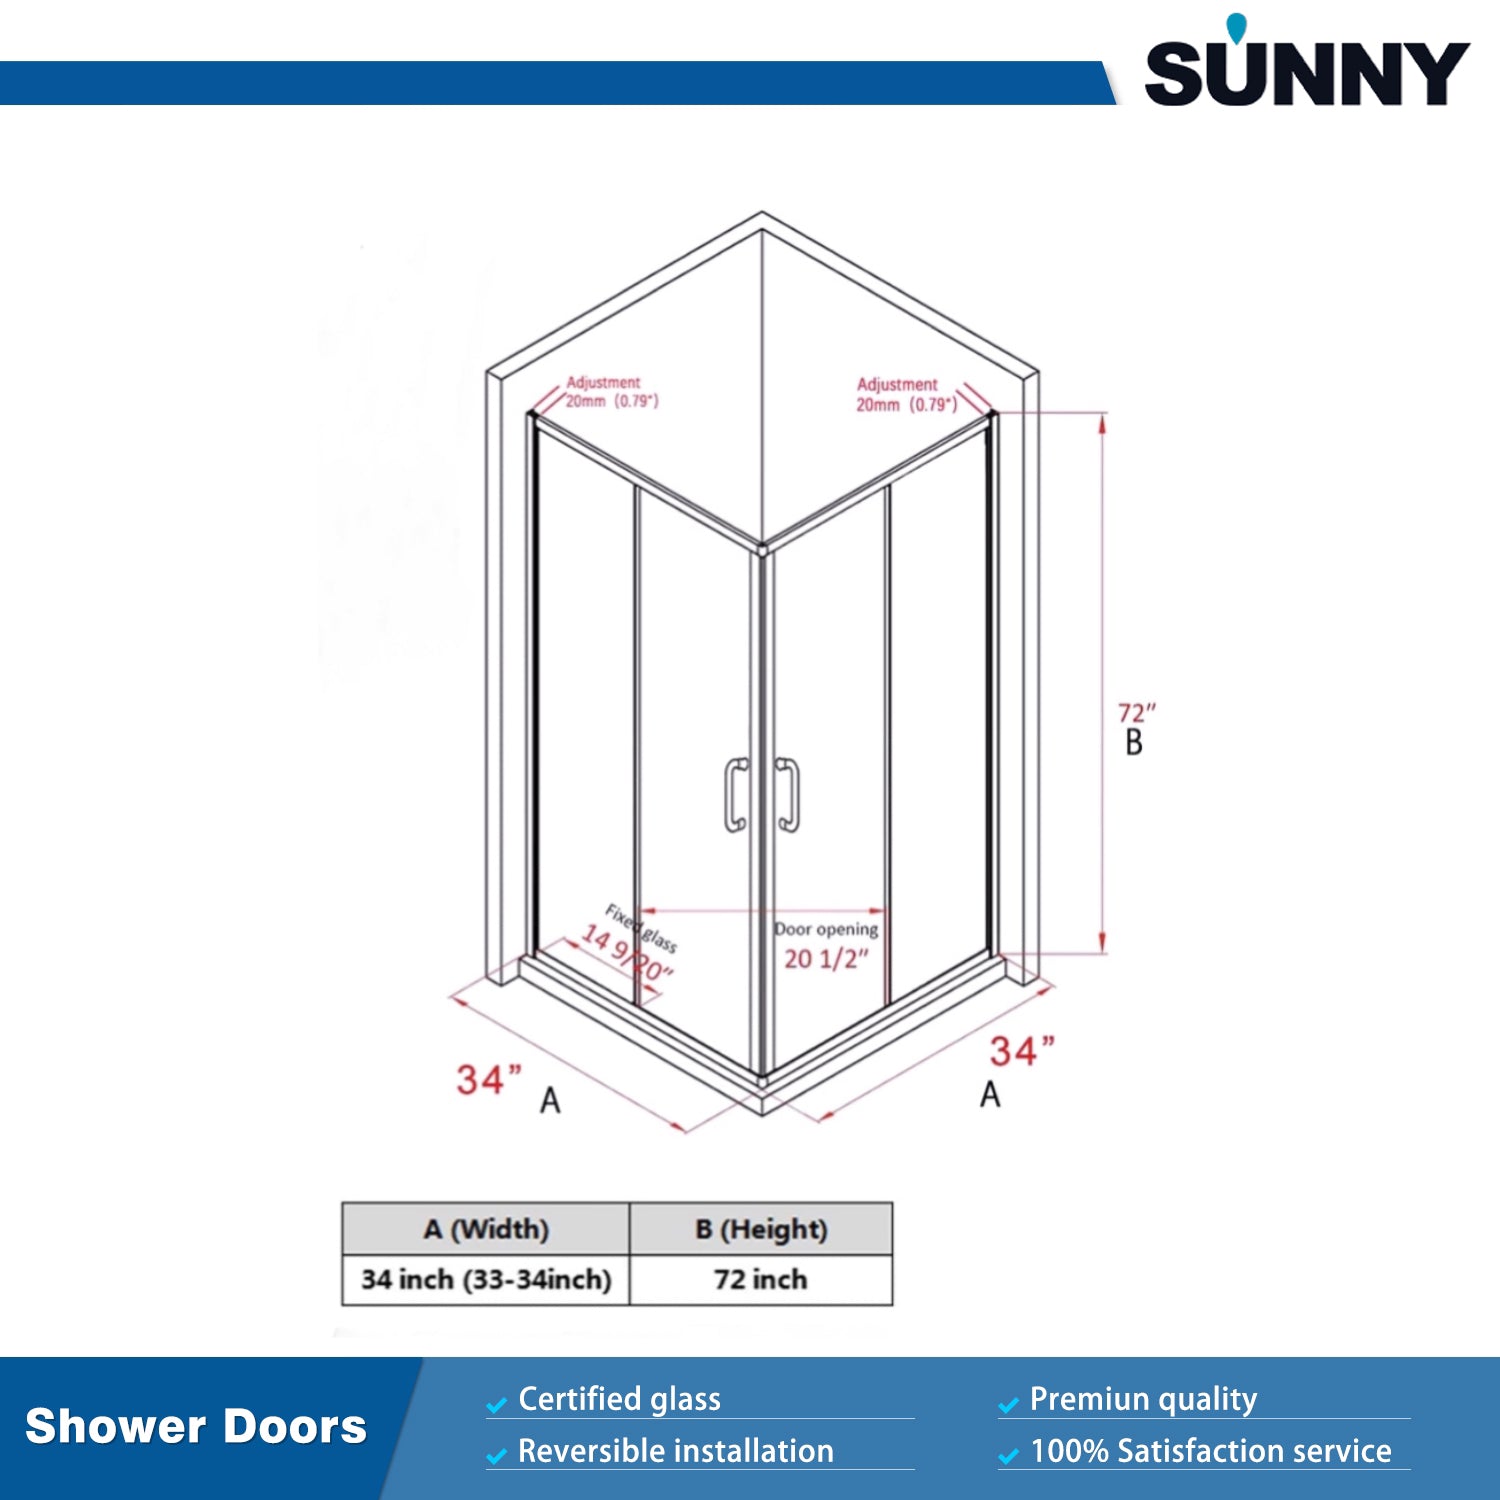 SUNNY SHOWER 34 in. L x 34 in. W x 72 in. H Brushed Nickel Finish Corner Entry Enclosure With Sliding Doors Size Chart